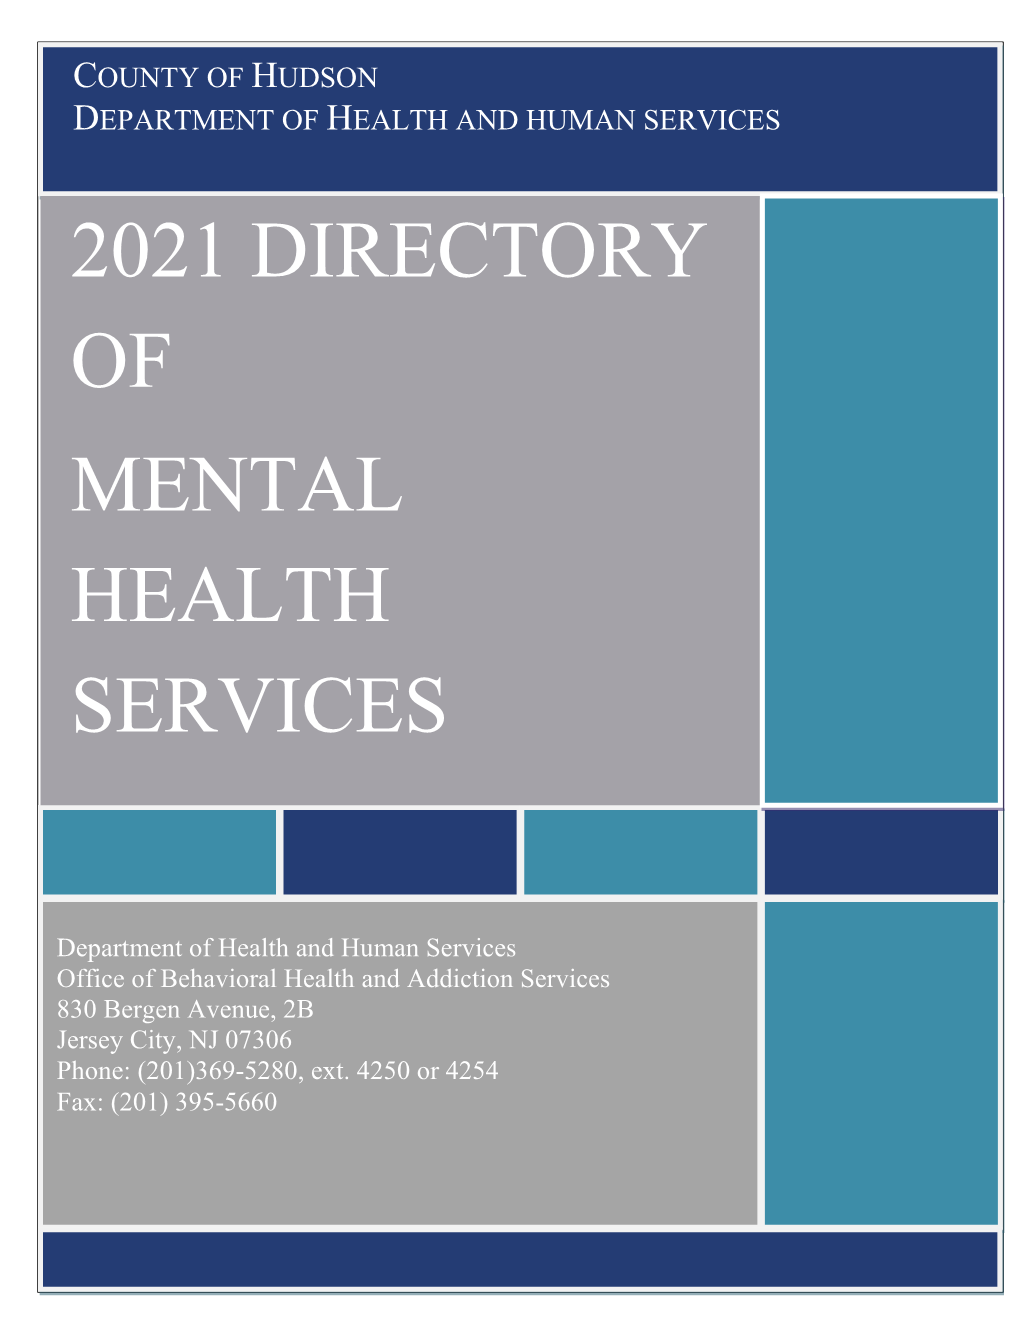 2021 Directory of Mental Health Services